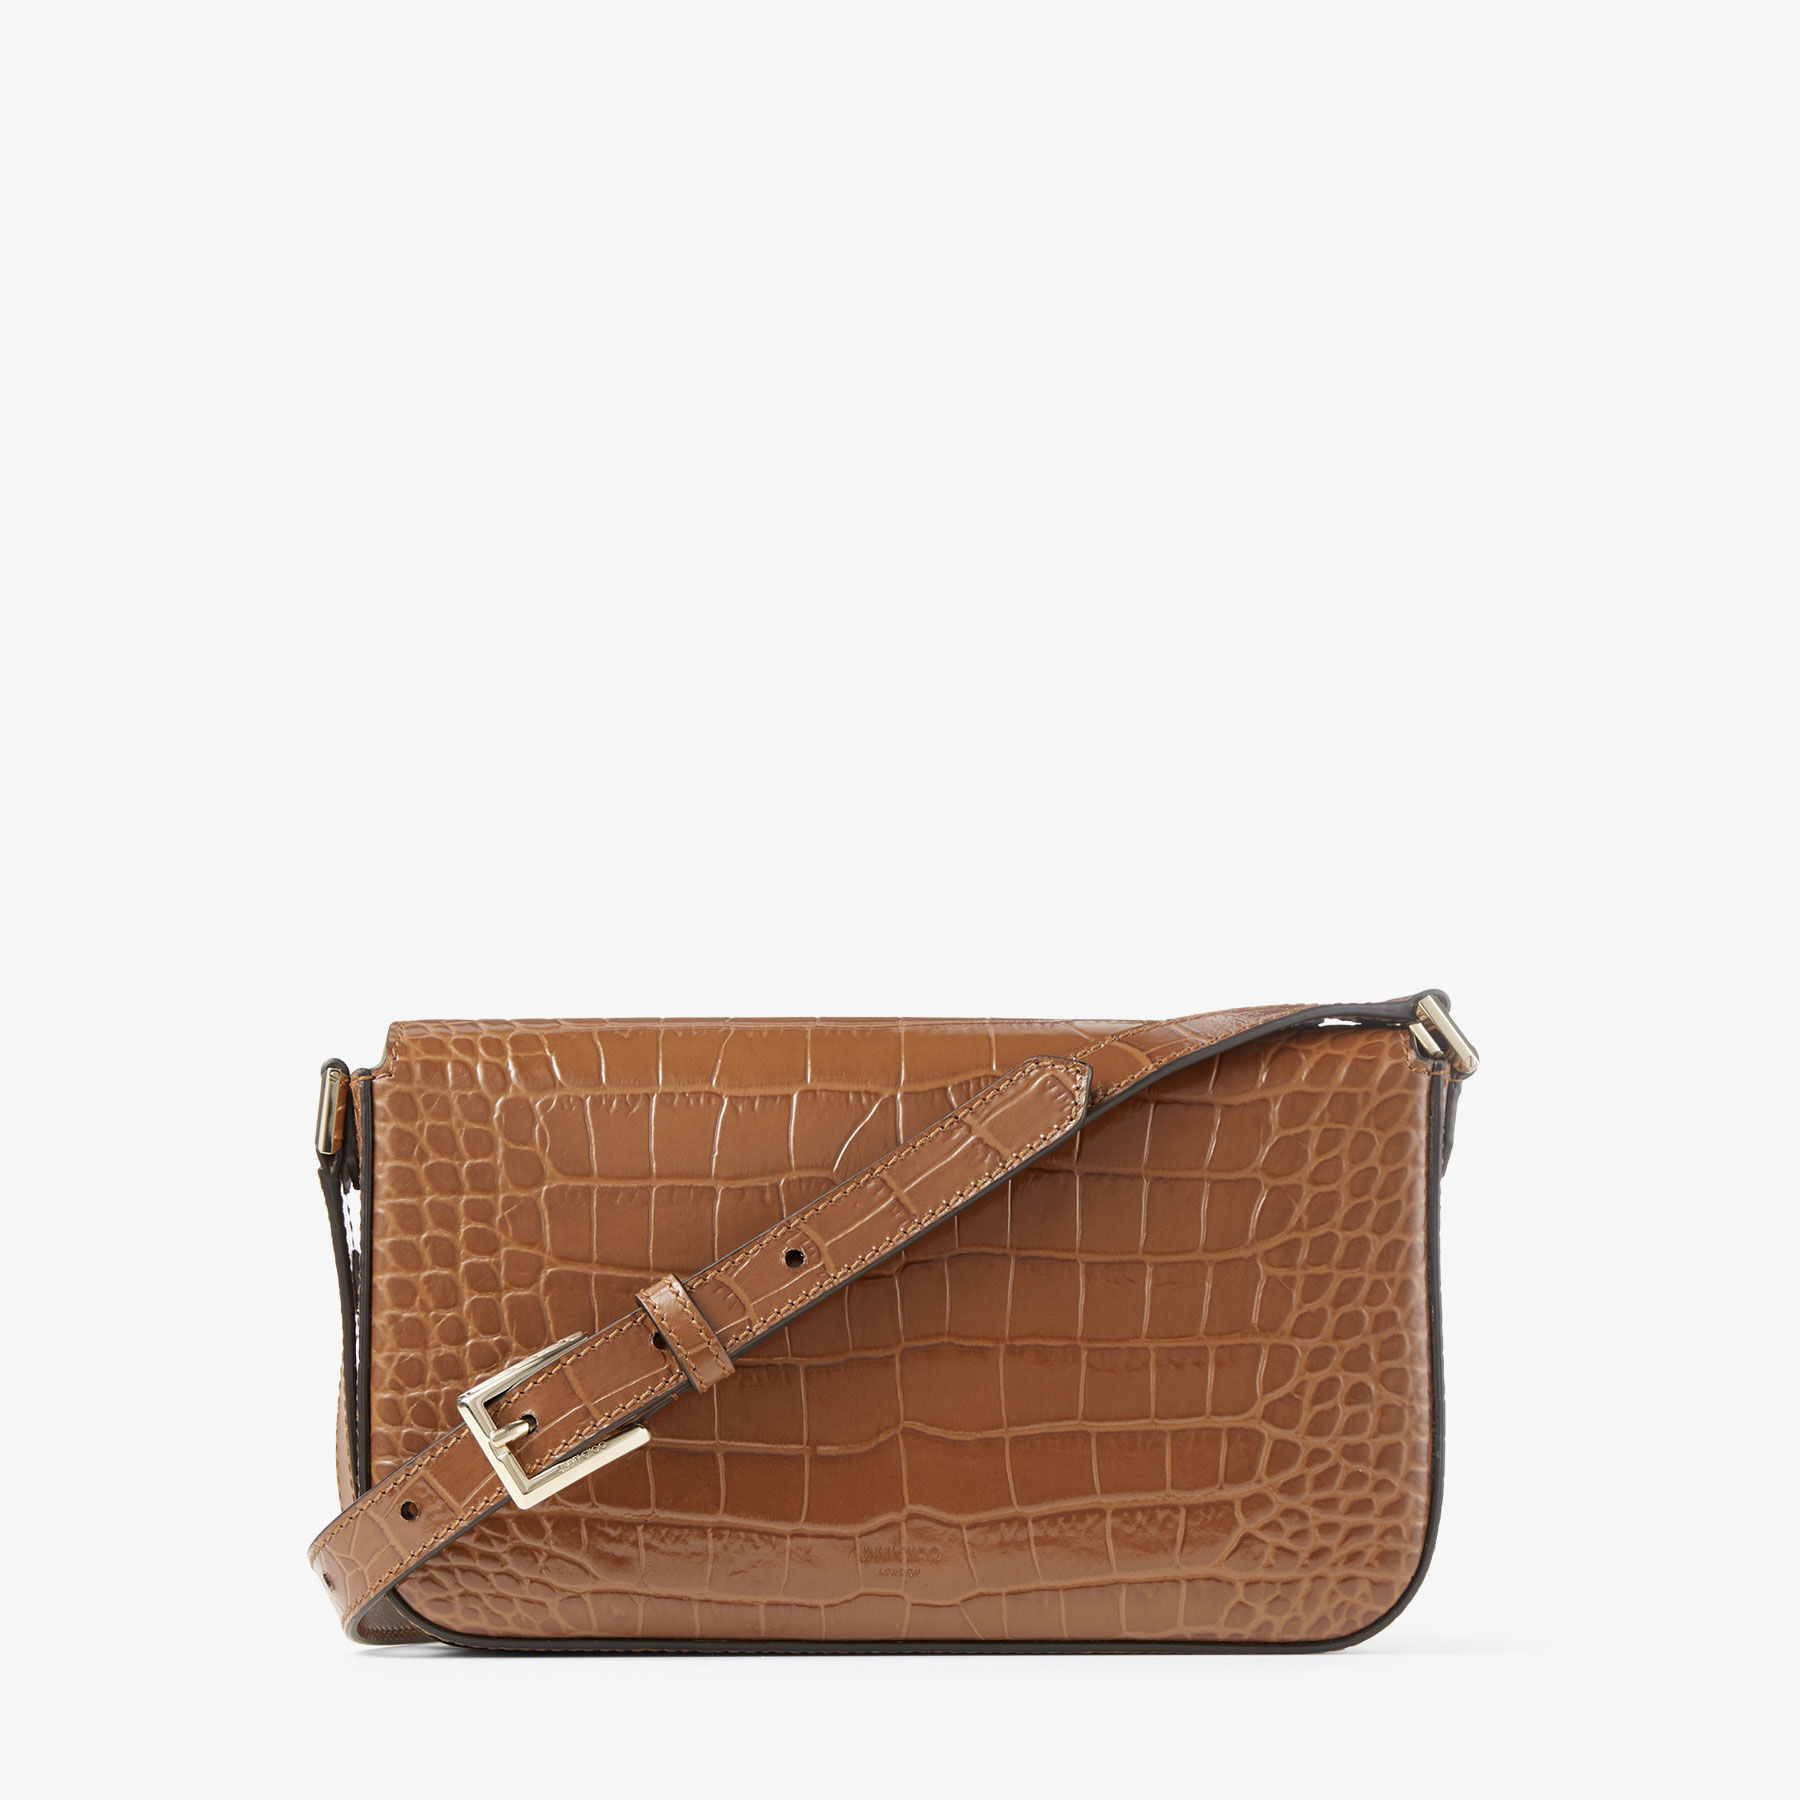  Other Stories Patent Leather Croc Embossed Bag in Brown